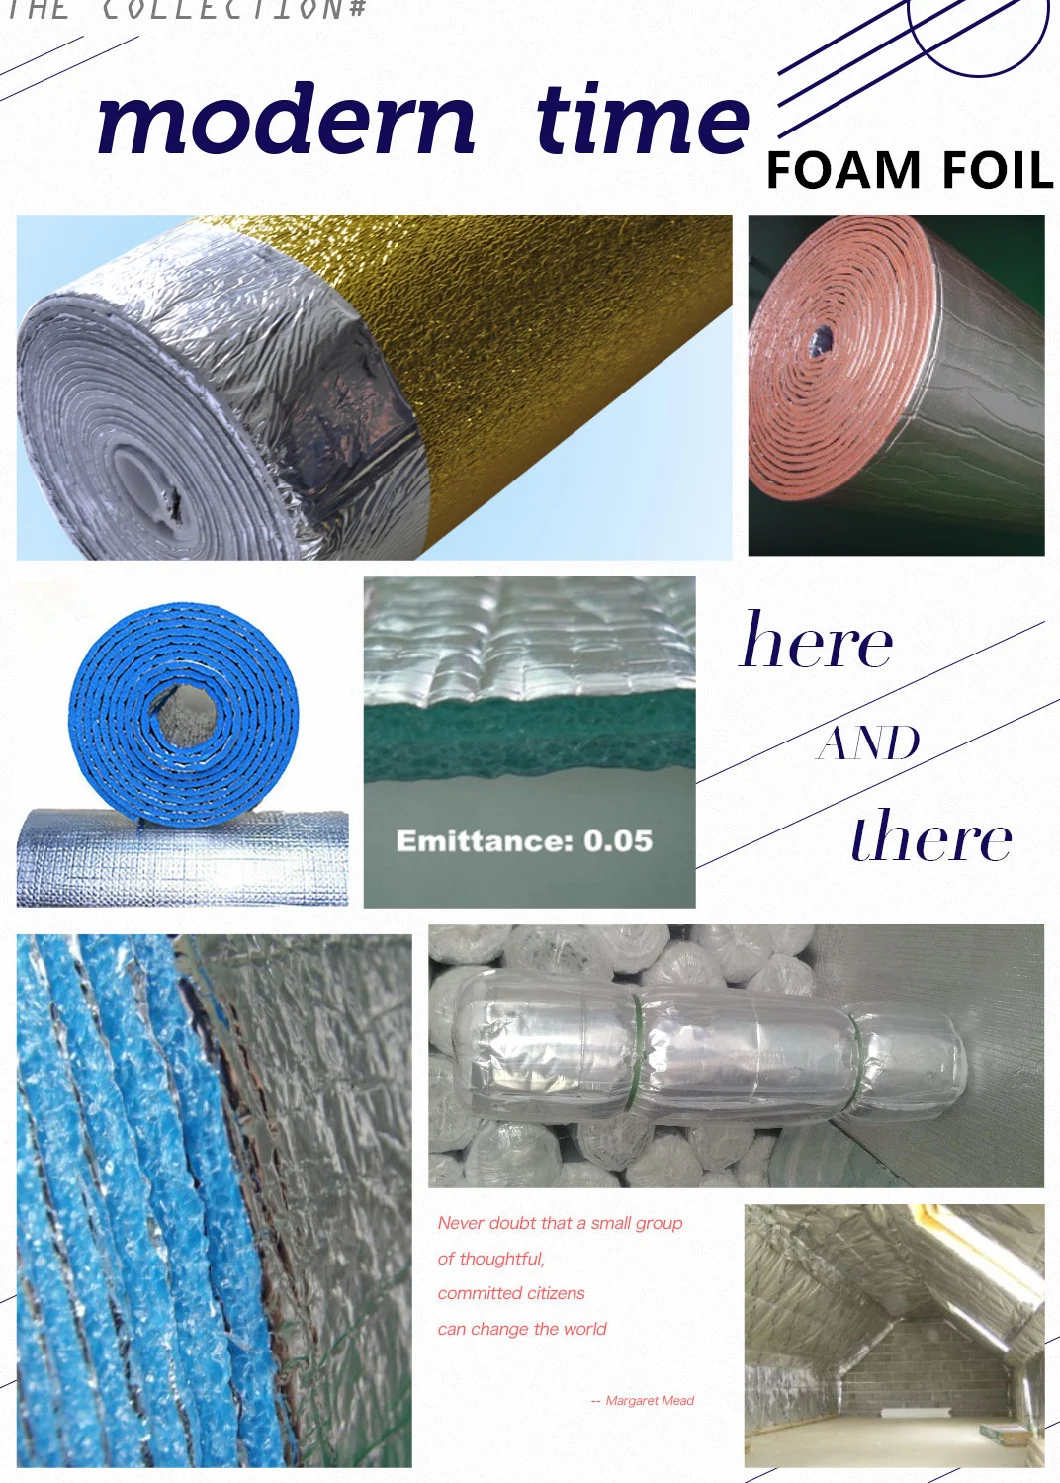 Chase Blue Pack OEM Polyurethane MPET Foams Insulation Material Foam Board Insulation Alu Foil Coated Xxpe Foam Thermal Insulation